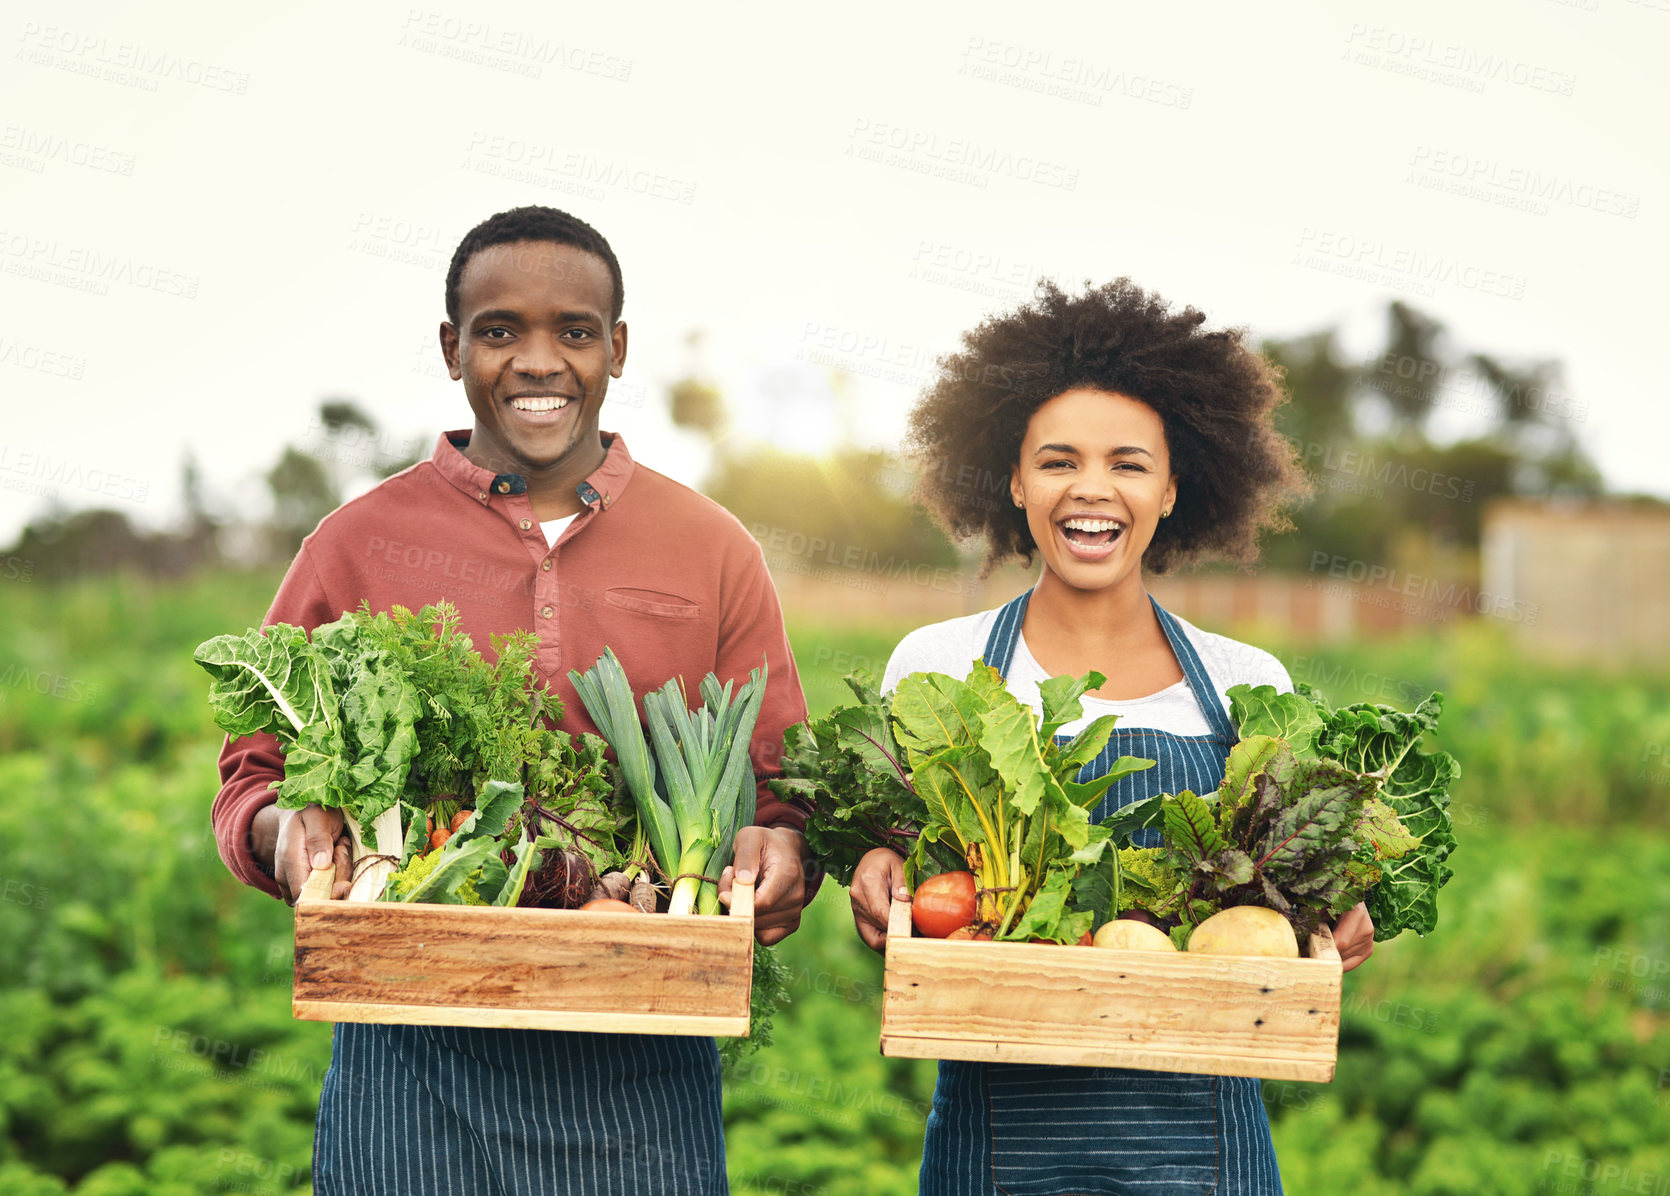 Buy stock photo Cropped portrait of a young farm couple carrying crates of fresh produce